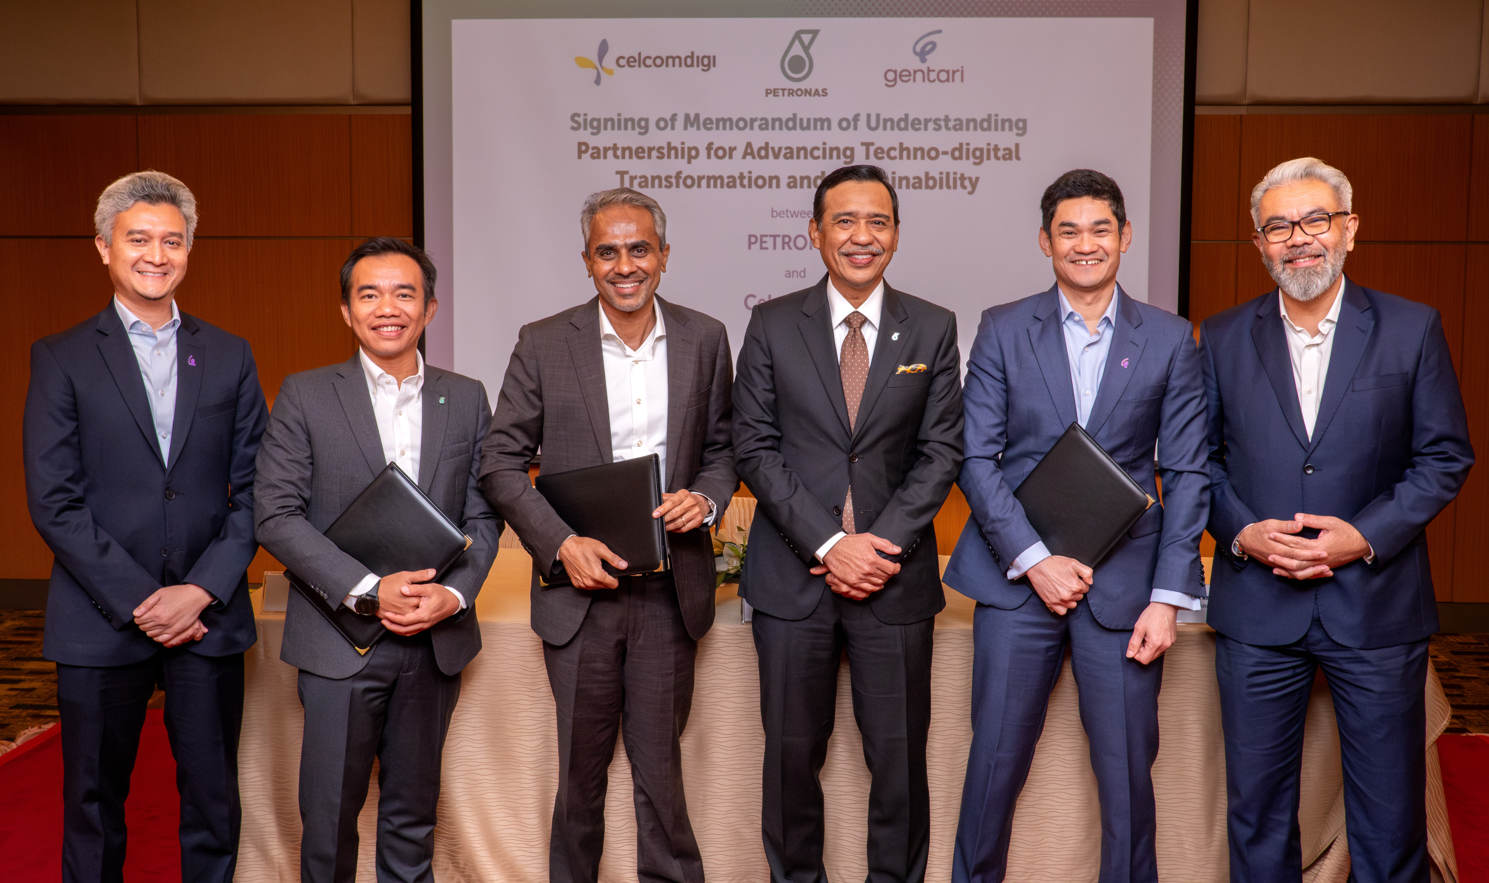 (From Left) Sy Malek Faisal Sy Mohamad, Gentari head of Renewables for Malaysia and SEA; Aadrin Azly, PETRONAS group technology and commercialisation vice president; Albern Murty, CelcomDigi’s Deputy CEO; Mohd Yusri Mohamed Yusof, PETRONAS Project Delivery and Technology senior vice president; Shah Yang Razalli, Gentari Deputy CEO; Afizulazha Abdullah, CelcomDigi’s chief enterprise business officer, at the MoU signing ceremony.